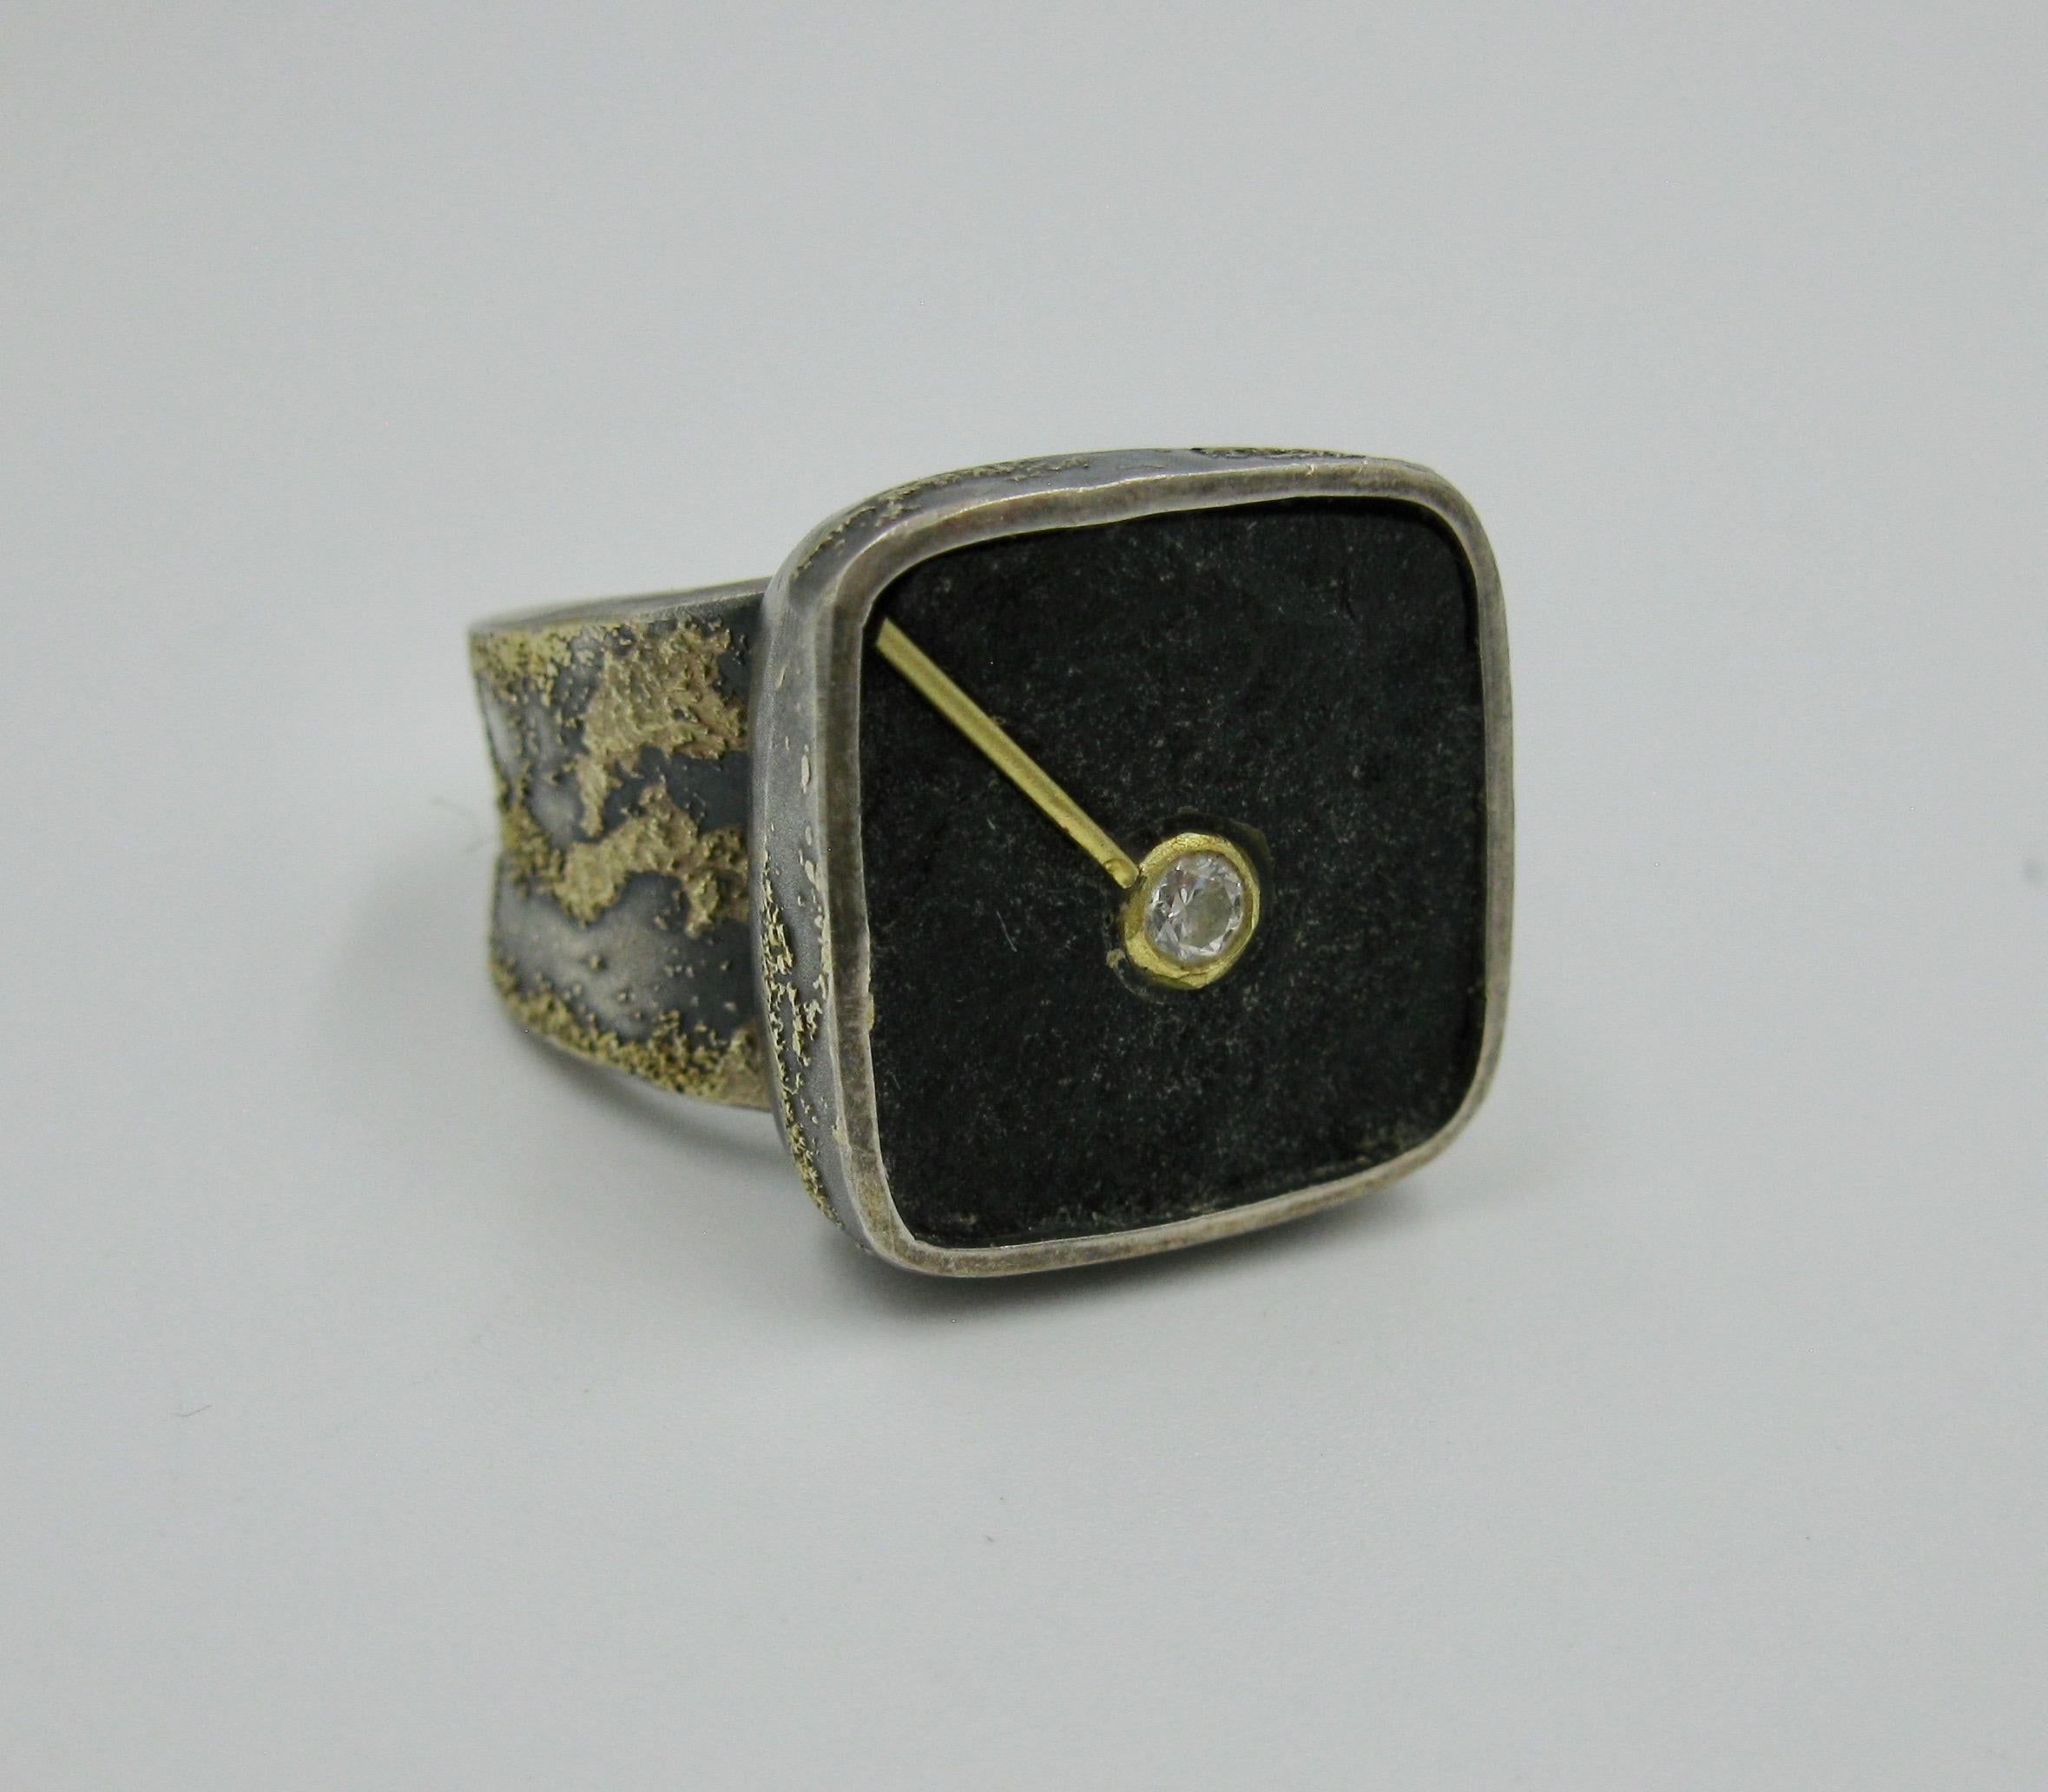 THIS IS A WONDERFUL MID-CENTURY MODERNIST EAMES ERA RING BY THE HIGHLY COLLECTIBLE MASTER JEWELER ROSS COPPELMAN.   The ring in Sterling Silver centering a square Hardstone with 22 Karat Gold accents and a Diamond center in a modern watch motif